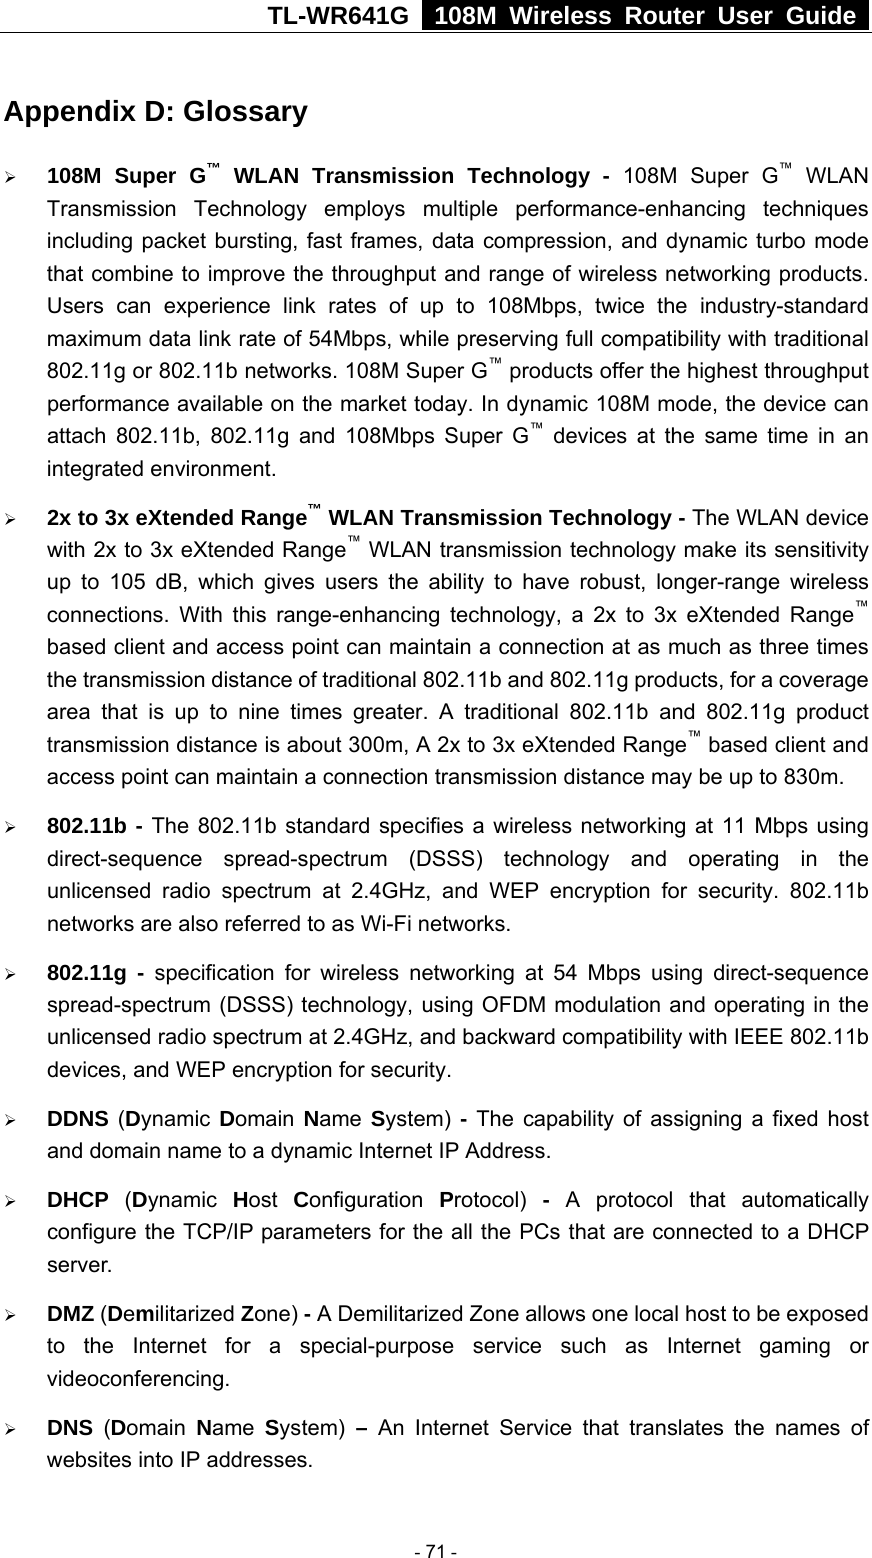 TL-WR641G   108M Wireless Router User Guide  Appendix D: Glossary ¾ 108M Super G™ WLAN Transmission Technology - 108M Super G™ WLAN Transmission Technology employs multiple performance-enhancing techniques including packet bursting, fast frames, data compression, and dynamic turbo mode that combine to improve the throughput and range of wireless networking products. Users can experience link rates of up to 108Mbps, twice the industry-standard maximum data link rate of 54Mbps, while preserving full compatibility with traditional 802.11g or 802.11b networks. 108M Super G™ products offer the highest throughput performance available on the market today. In dynamic 108M mode, the device can attach 802.11b, 802.11g and 108Mbps Super G™ devices at the same time in an integrated environment. ¾ 2x to 3x eXtended Range™ WLAN Transmission Technology - The WLAN device with 2x to 3x eXtended Range™ WLAN transmission technology make its sensitivity up to 105 dB, which gives users the ability to have robust, longer-range wireless connections. With this range-enhancing technology, a 2x to 3x eXtended Range™ based client and access point can maintain a connection at as much as three times the transmission distance of traditional 802.11b and 802.11g products, for a coverage area that is up to nine times greater. A traditional 802.11b and 802.11g product transmission distance is about 300m, A 2x to 3x eXtended Range™ based client and access point can maintain a connection transmission distance may be up to 830m. ¾ 802.11b - The 802.11b standard specifies a wireless networking at 11 Mbps using direct-sequence spread-spectrum (DSSS) technology and operating in the unlicensed radio spectrum at 2.4GHz, and WEP encryption for security. 802.11b networks are also referred to as Wi-Fi networks. ¾ 802.11g - specification for wireless networking at 54 Mbps using direct-sequence spread-spectrum (DSSS) technology, using OFDM modulation and operating in the unlicensed radio spectrum at 2.4GHz, and backward compatibility with IEEE 802.11b devices, and WEP encryption for security. ¾ DDNS (Dynamic  Domain  Name  System) - The capability of assigning a fixed host and domain name to a dynamic Internet IP Address.   ¾ DHCP  (Dynamic  Host  Configuration  Protocol)  - A protocol that automatically configure the TCP/IP parameters for the all the PCs that are connected to a DHCP server. ¾ DMZ (Demilitarized Zone) - A Demilitarized Zone allows one local host to be exposed to the Internet for a special-purpose service such as Internet gaming or videoconferencing. ¾ DNS  (Domain  Name  System) – An Internet Service that translates the names of websites into IP addresses.  - 71 - 